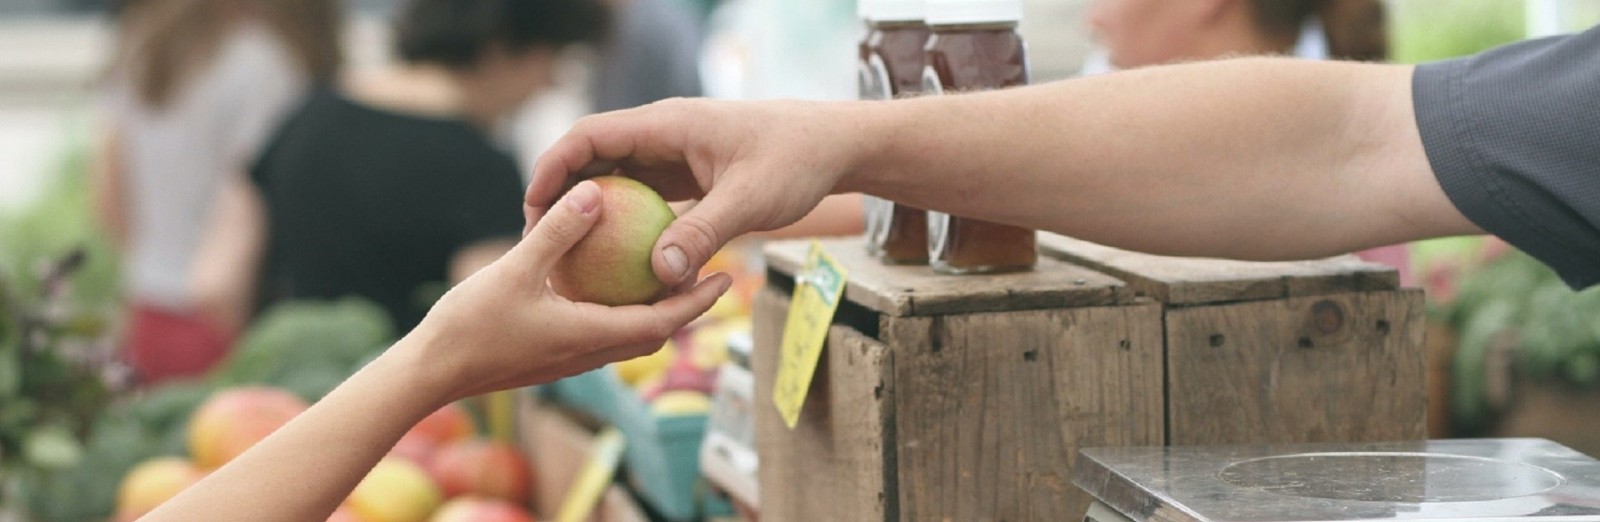 unidentified person at farmers market handing a customer an apple